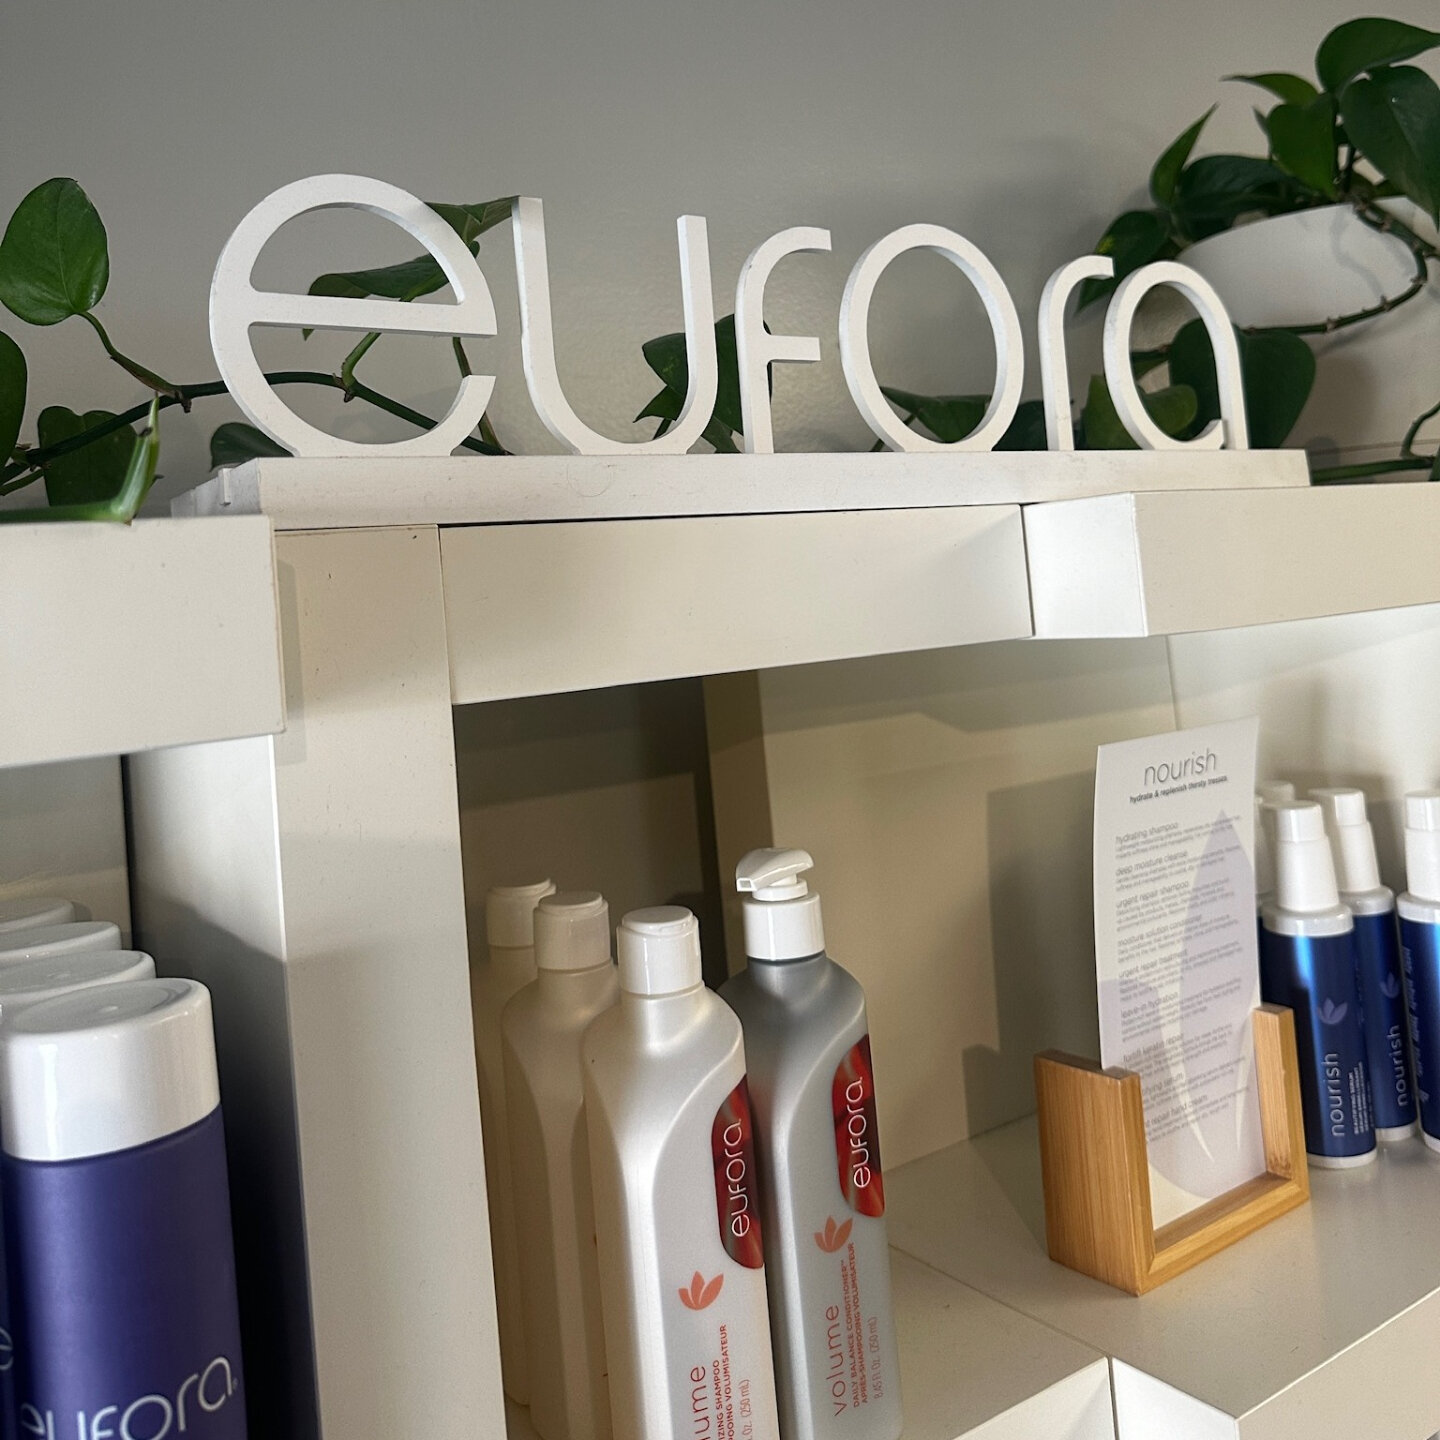 Looking to save on your next Eufora product haul? Today's the day! In celebration of our 12 days of Christmas sale, all Eufora products are BOGO 20% off!